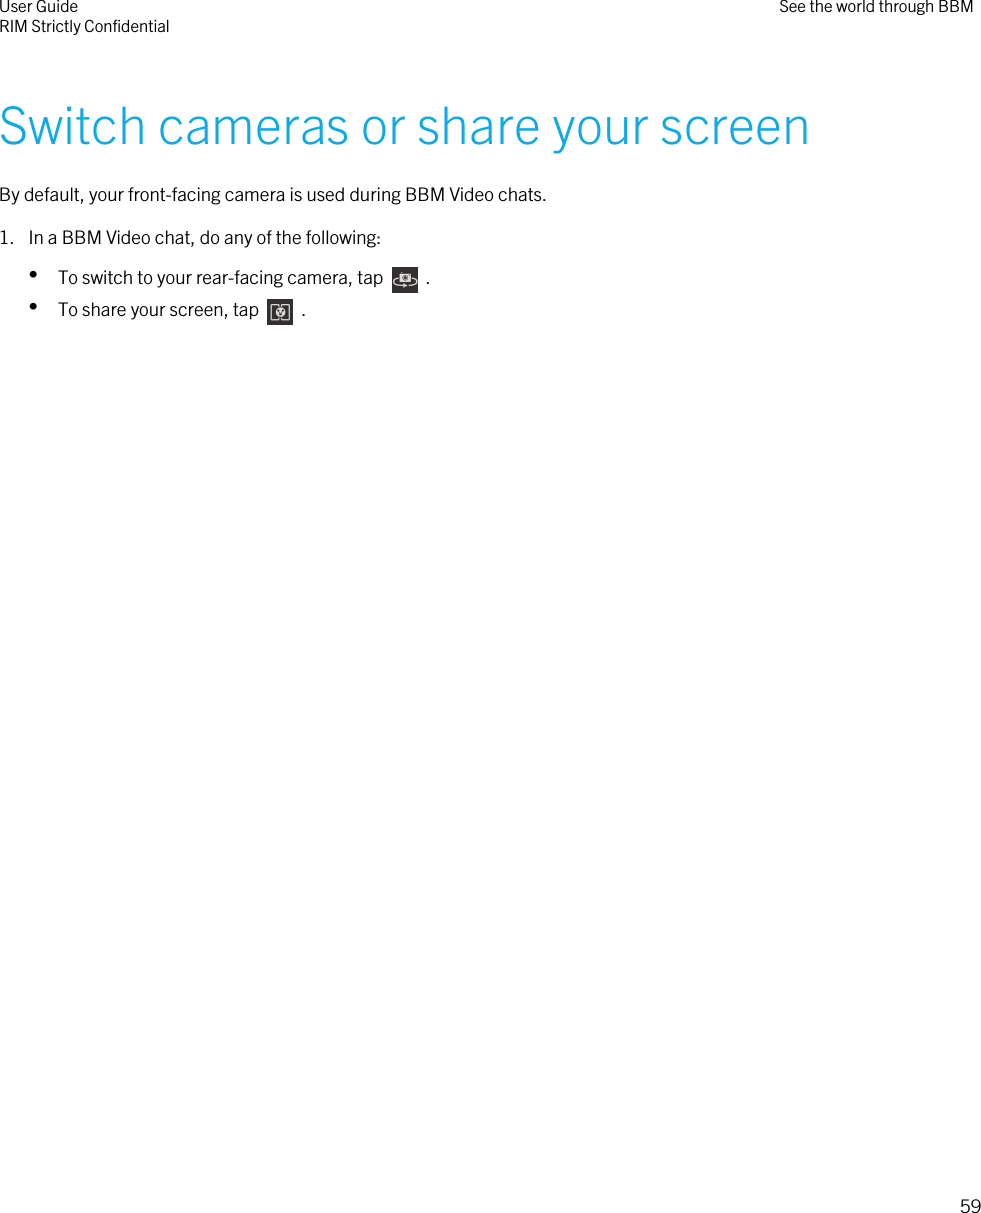 Switch cameras or share your screenBy default, your front-facing camera is used during BBM Video chats.1. In a BBM Video chat, do any of the following:•To switch to your rear-facing camera, tap    .•To share your screen, tap    .User GuideRIM Strictly Confidential See the world through BBM59